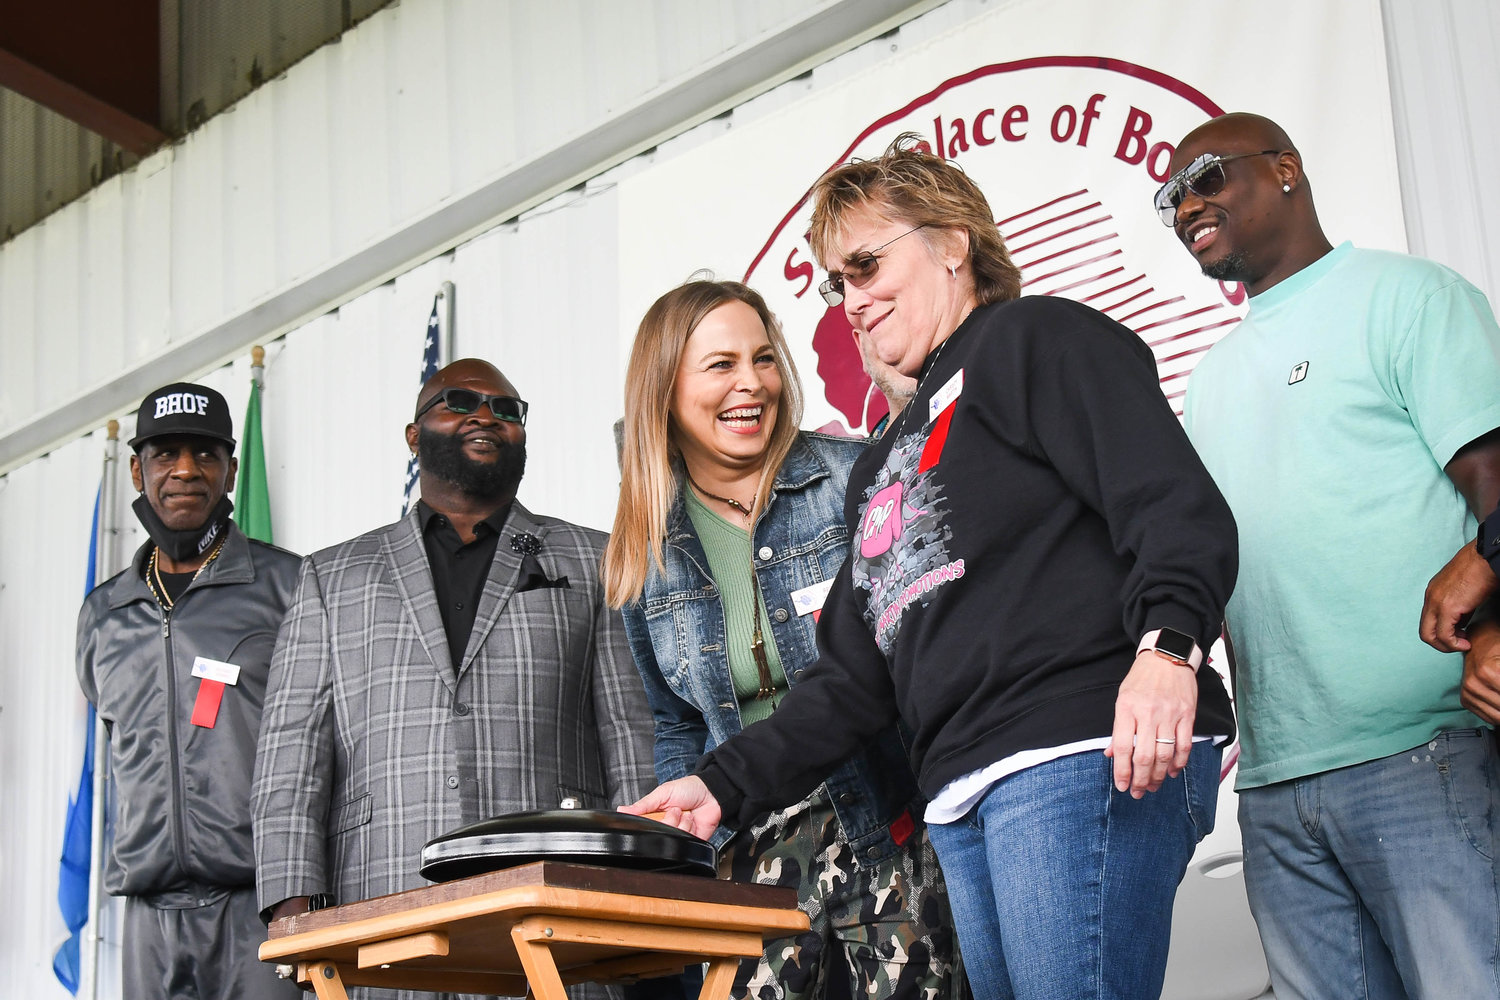 From left, International Boxing Hall of Fame inductees Michael Spinks, James Toney, Antonio Tarver look on as Regina Halmich interacts with Christy Martin while she rings the opening day bell to start the hall's Weekend Induction Trilogy on Thursday in Canastota. There are events throughout the weekend as the Hall of Fame inducts a slew of boxing legends.